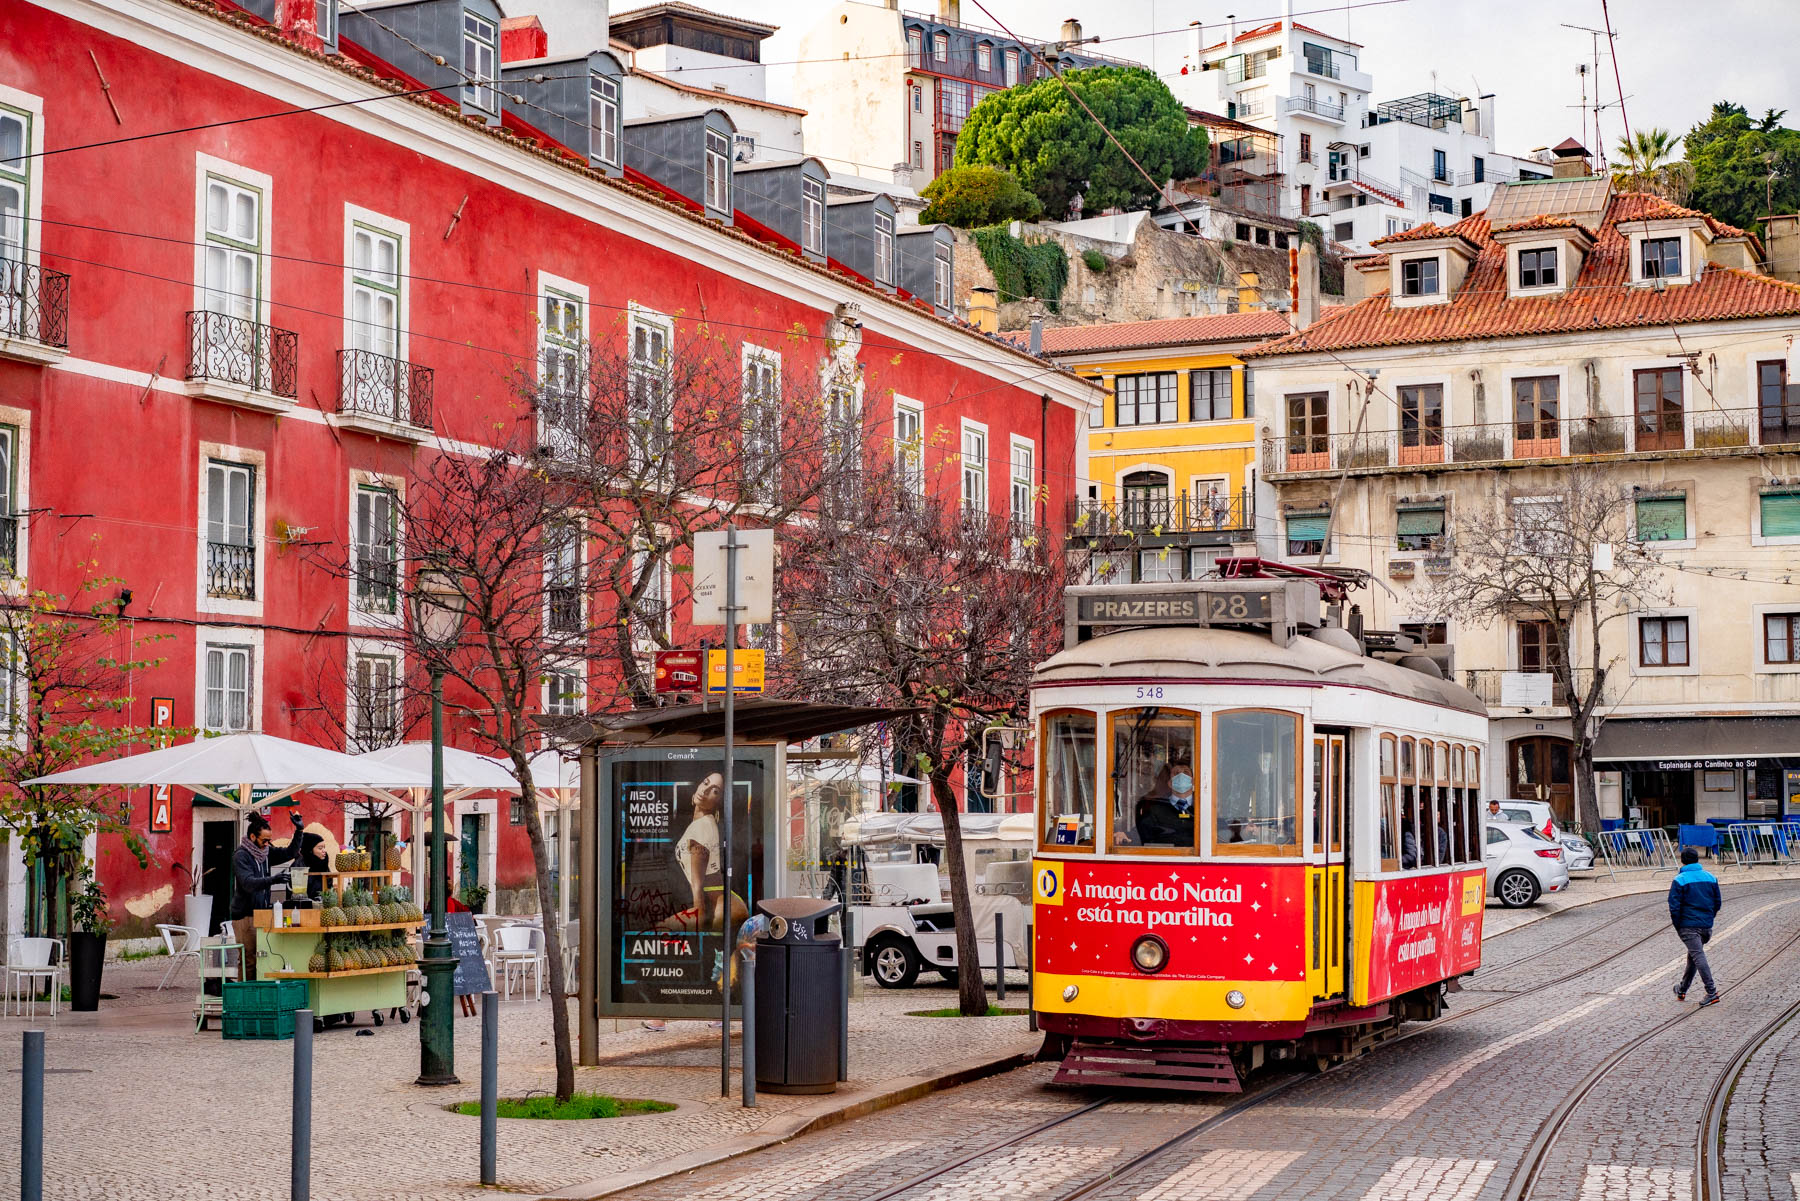 Visiting Lisbon for the first time things to do